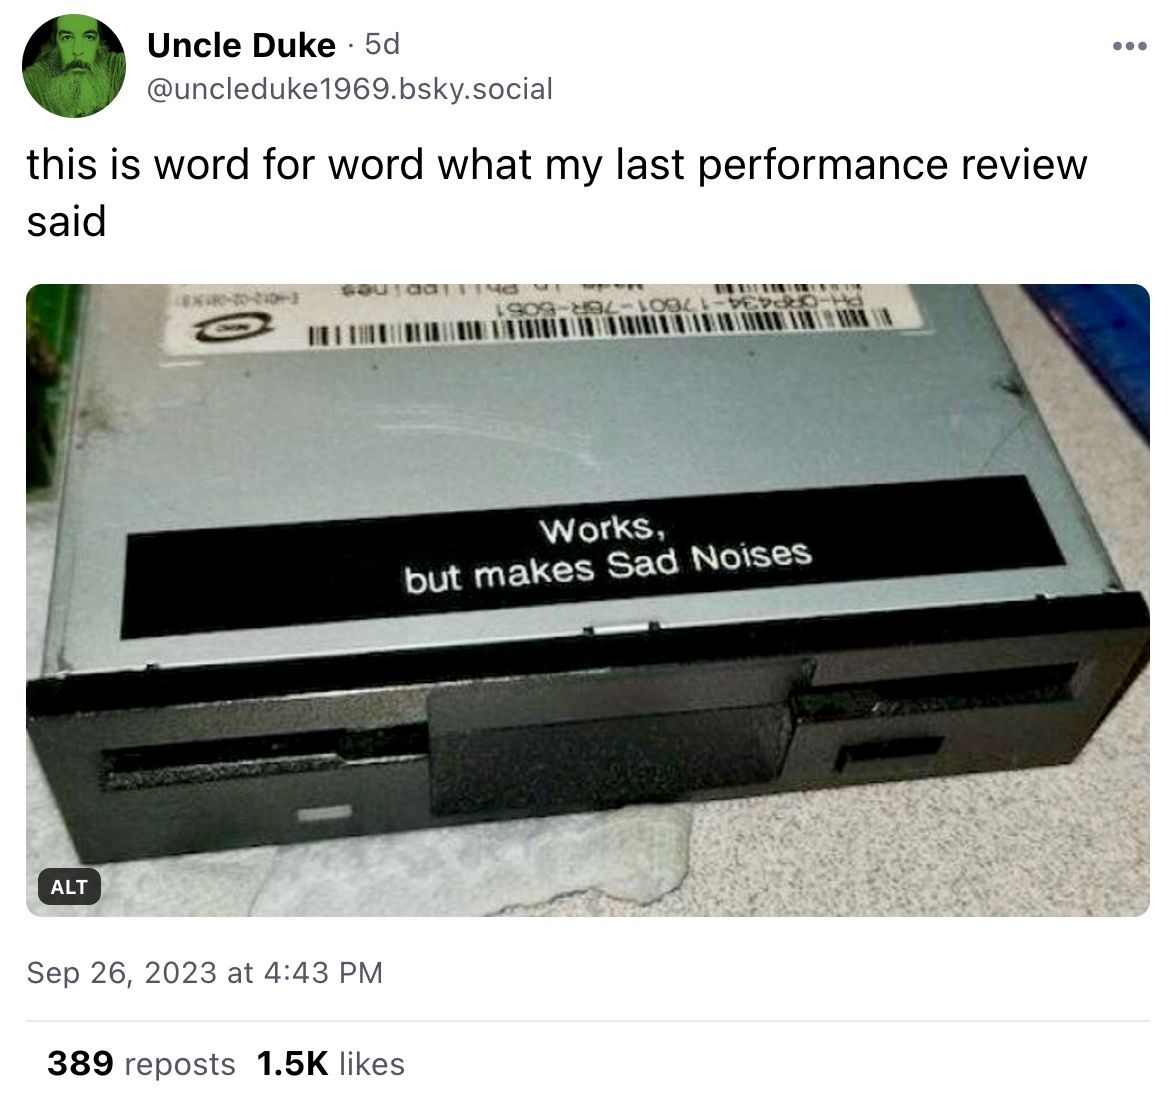 From Uncle Duke @uncleduke1969.bsky.social: "this is word for word what my last performance review said"